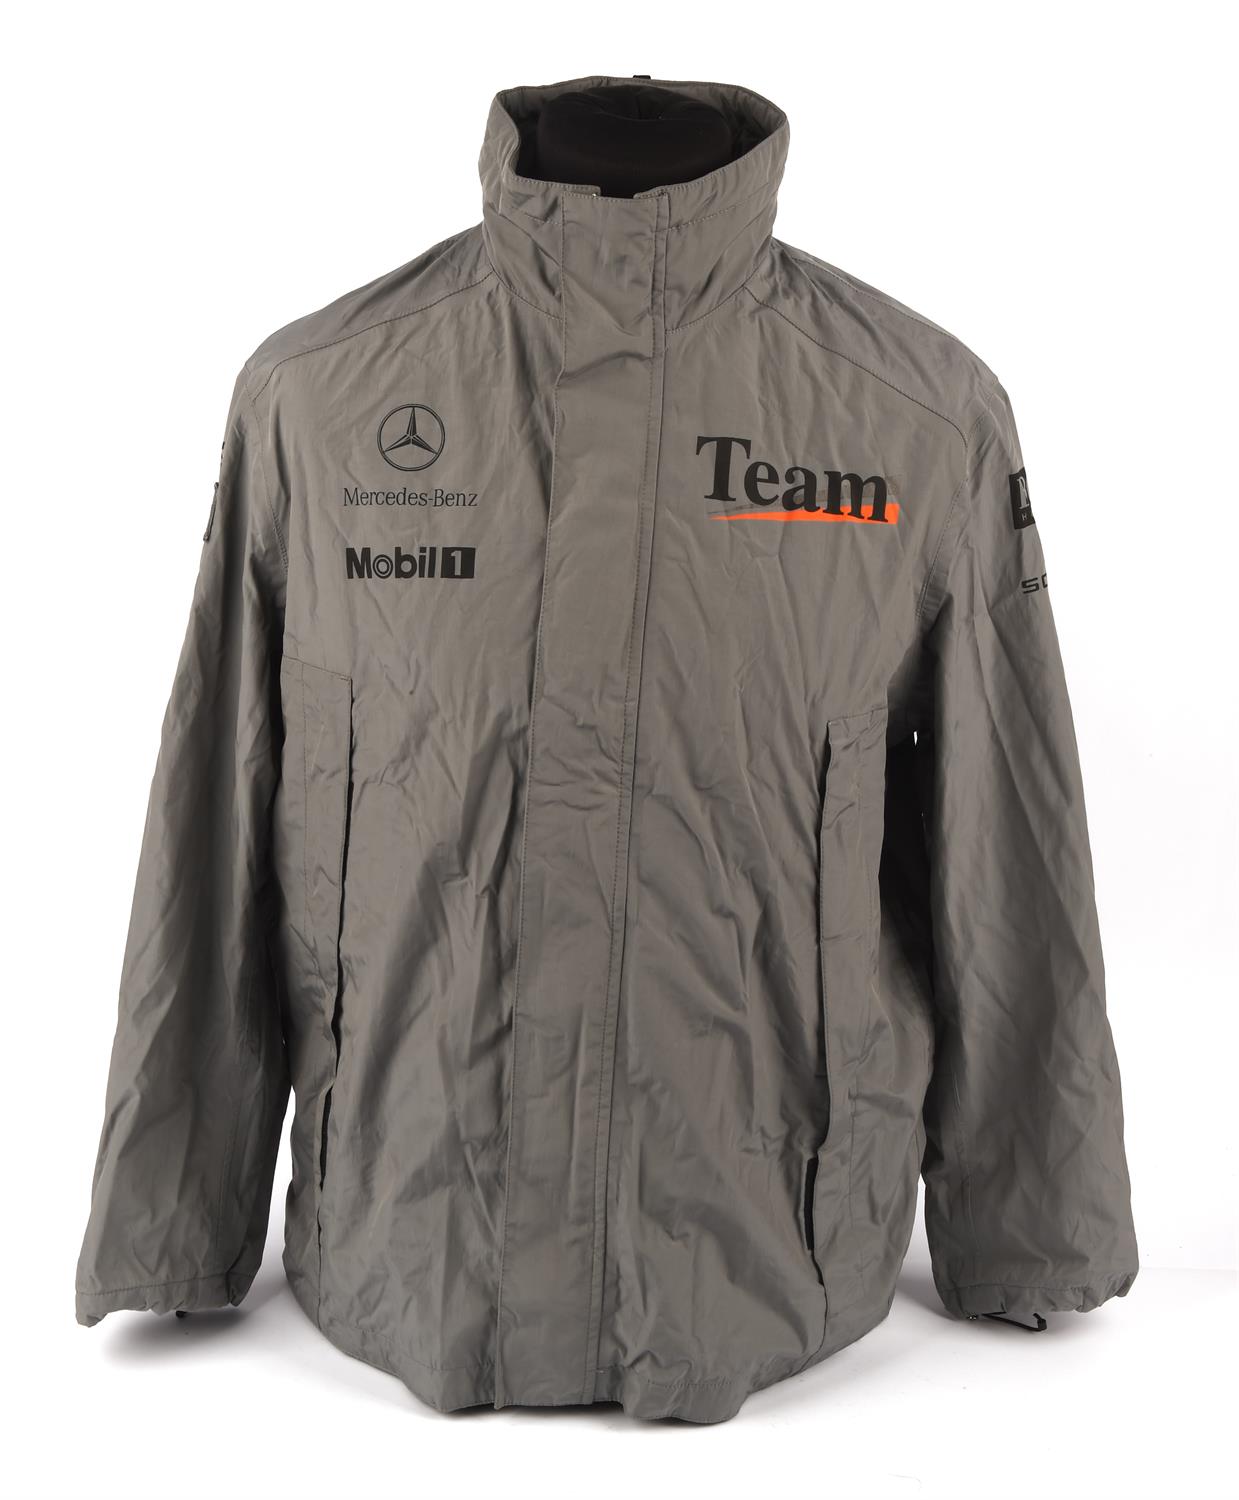 Exclusive McLaren Mercedes F1 Team Wear Clothing and other items - 5 Hugo Boss Clothing pieces - Image 5 of 13